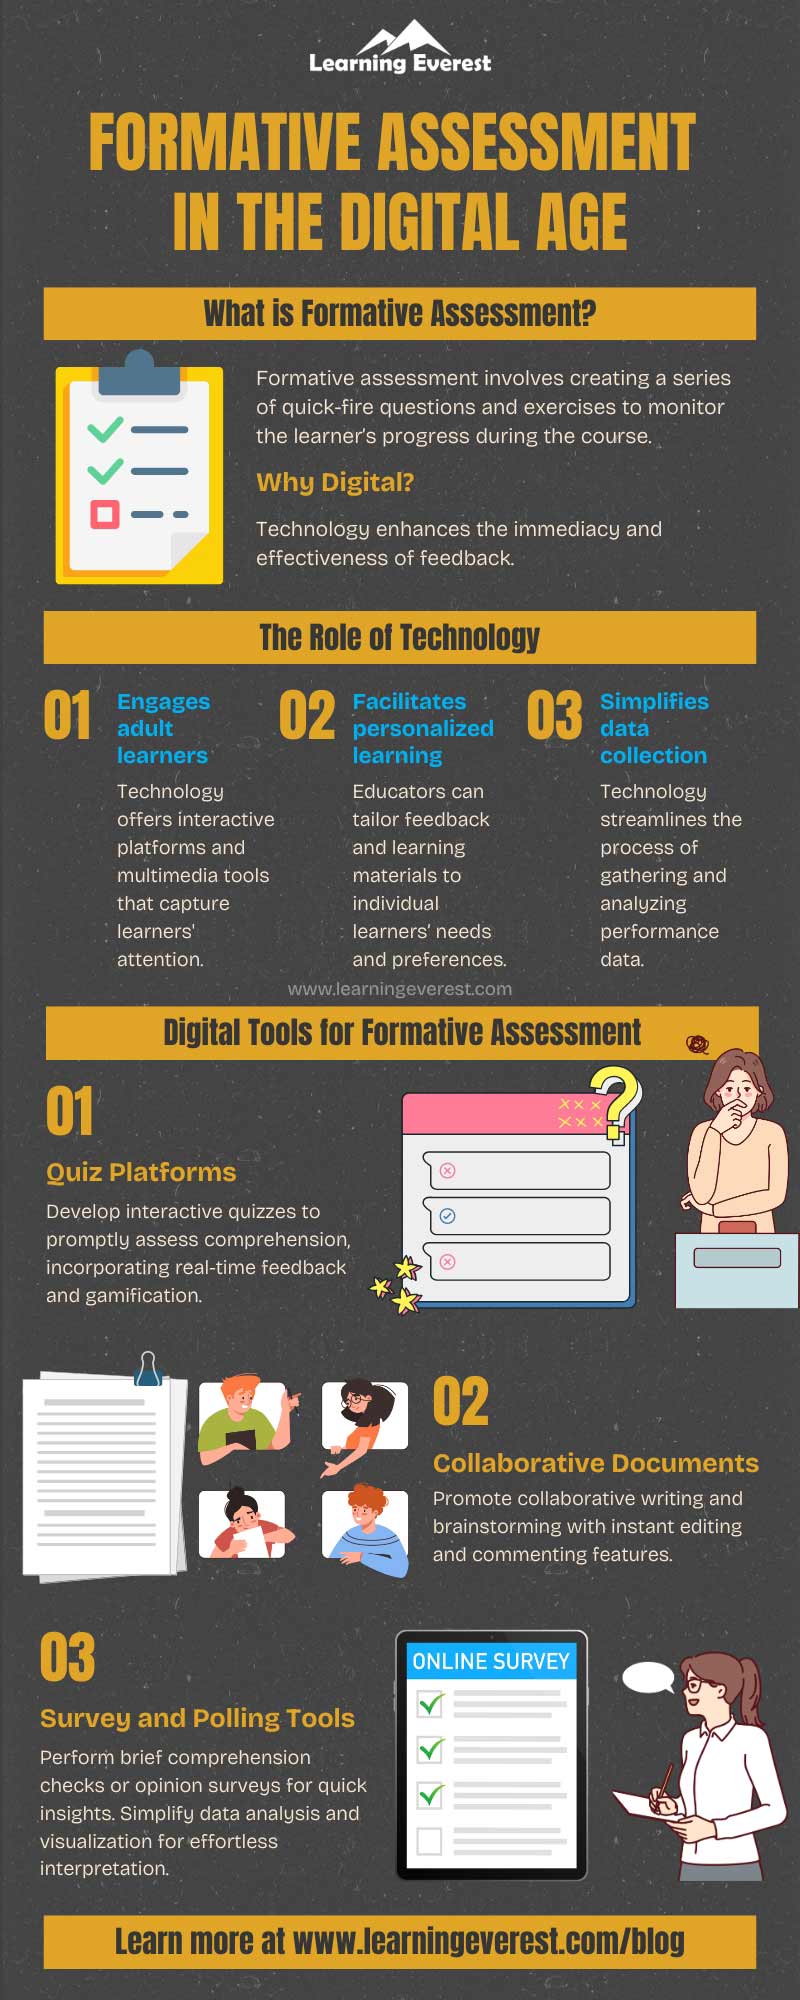 Formative Assessment in the Digital Age